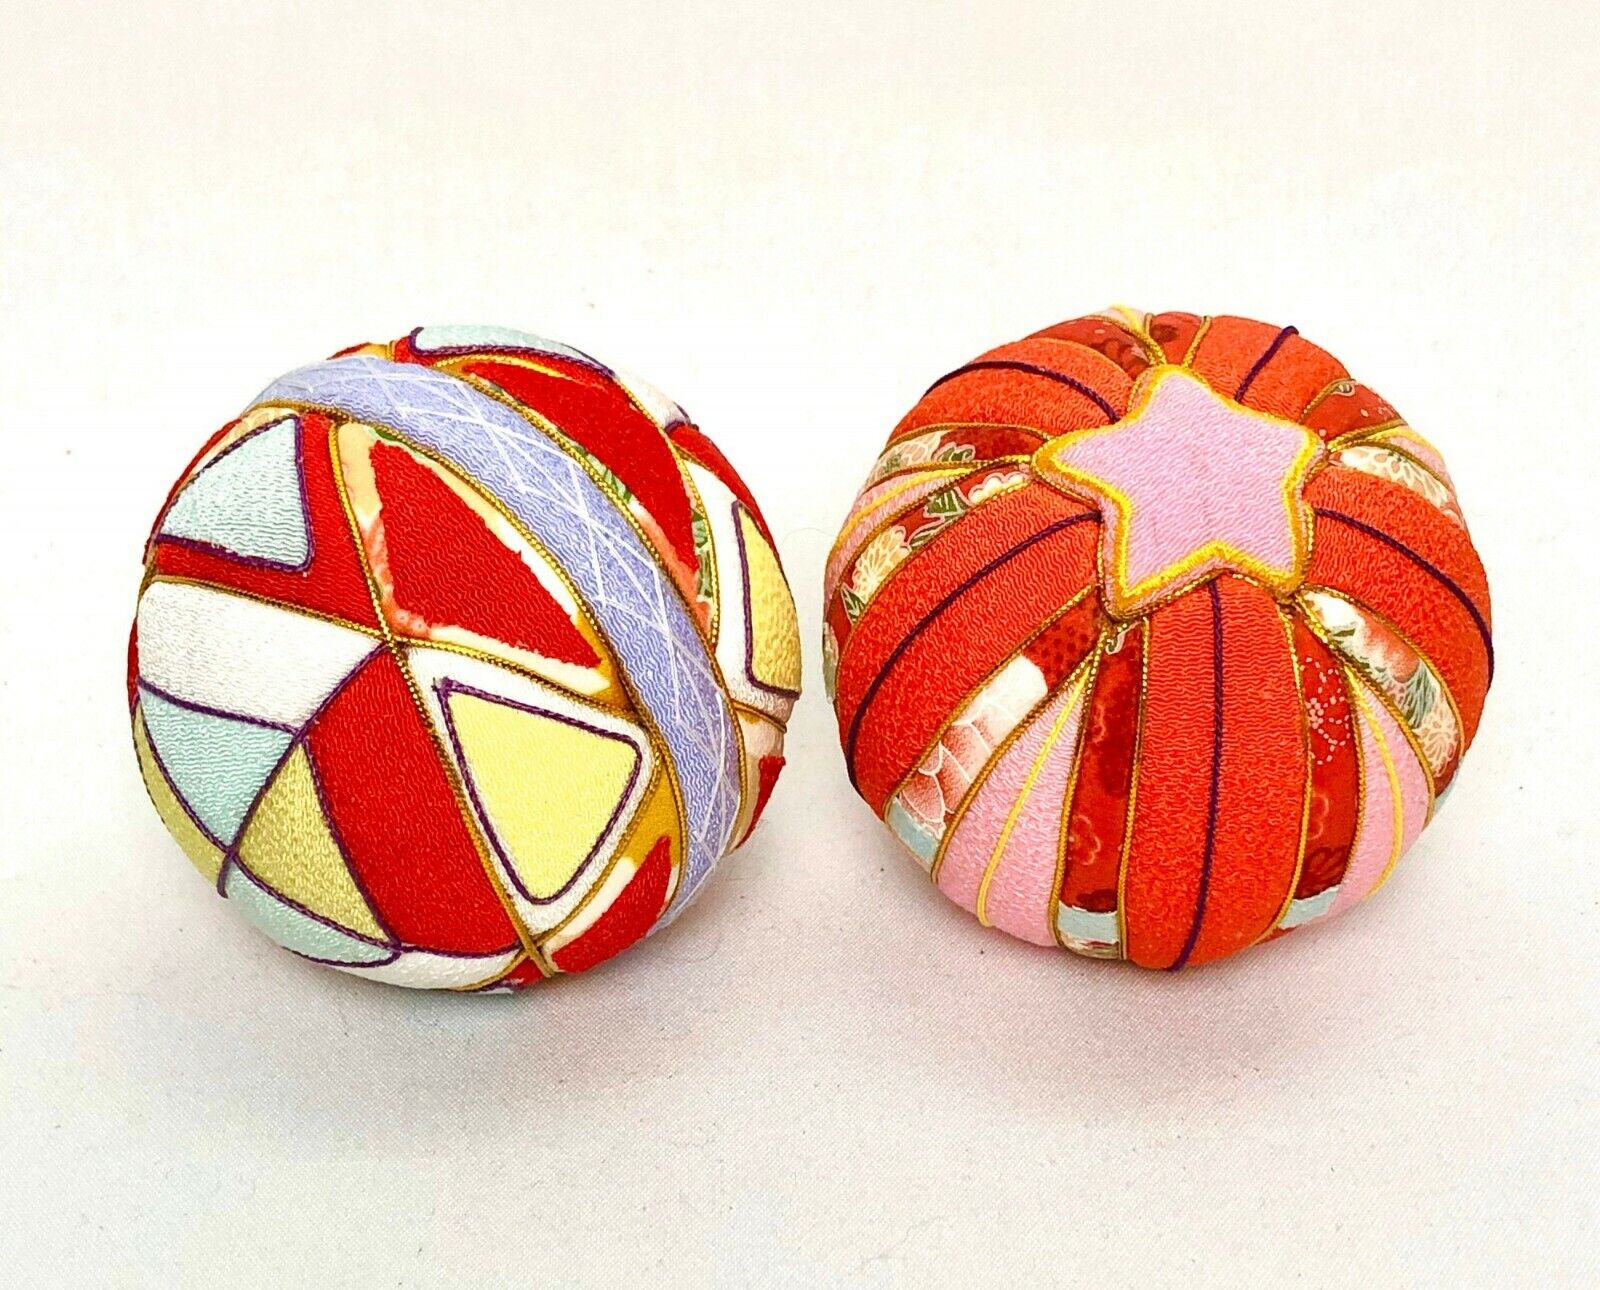 Vintage Quilted Ball Ornaments Fabric Patchwork Christmas Holiday